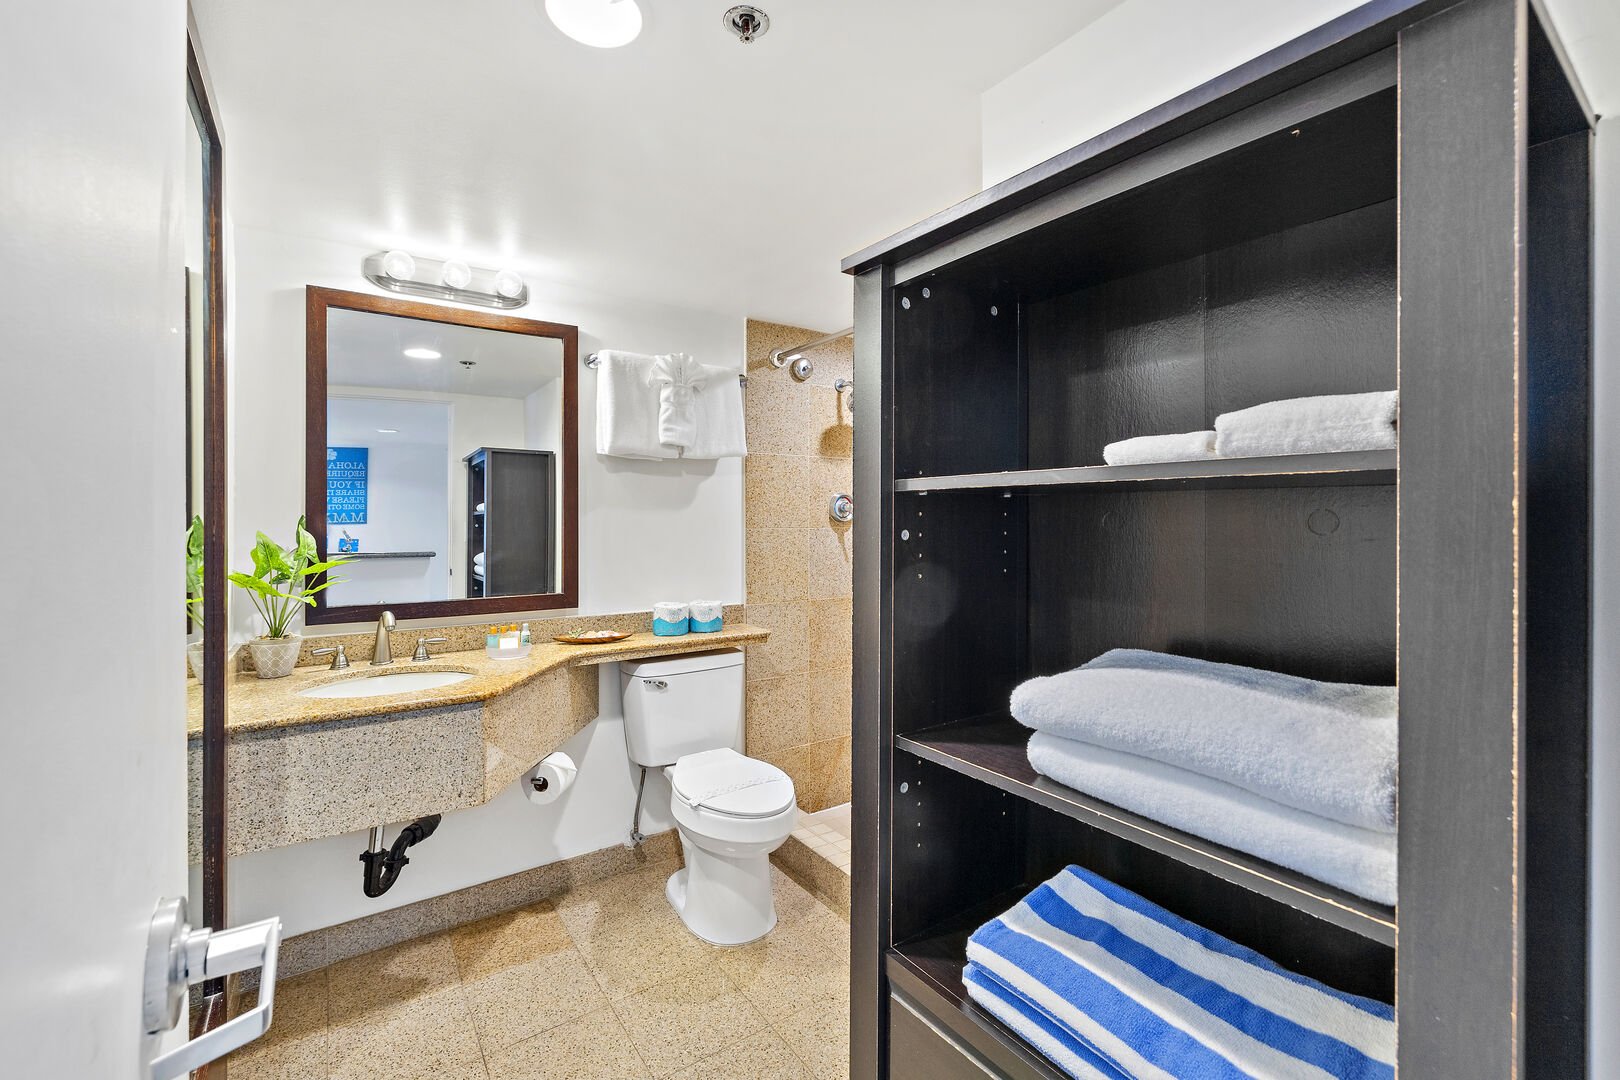 Closet in the bathroom. We provide bath and beach towels according to the 3 of guests